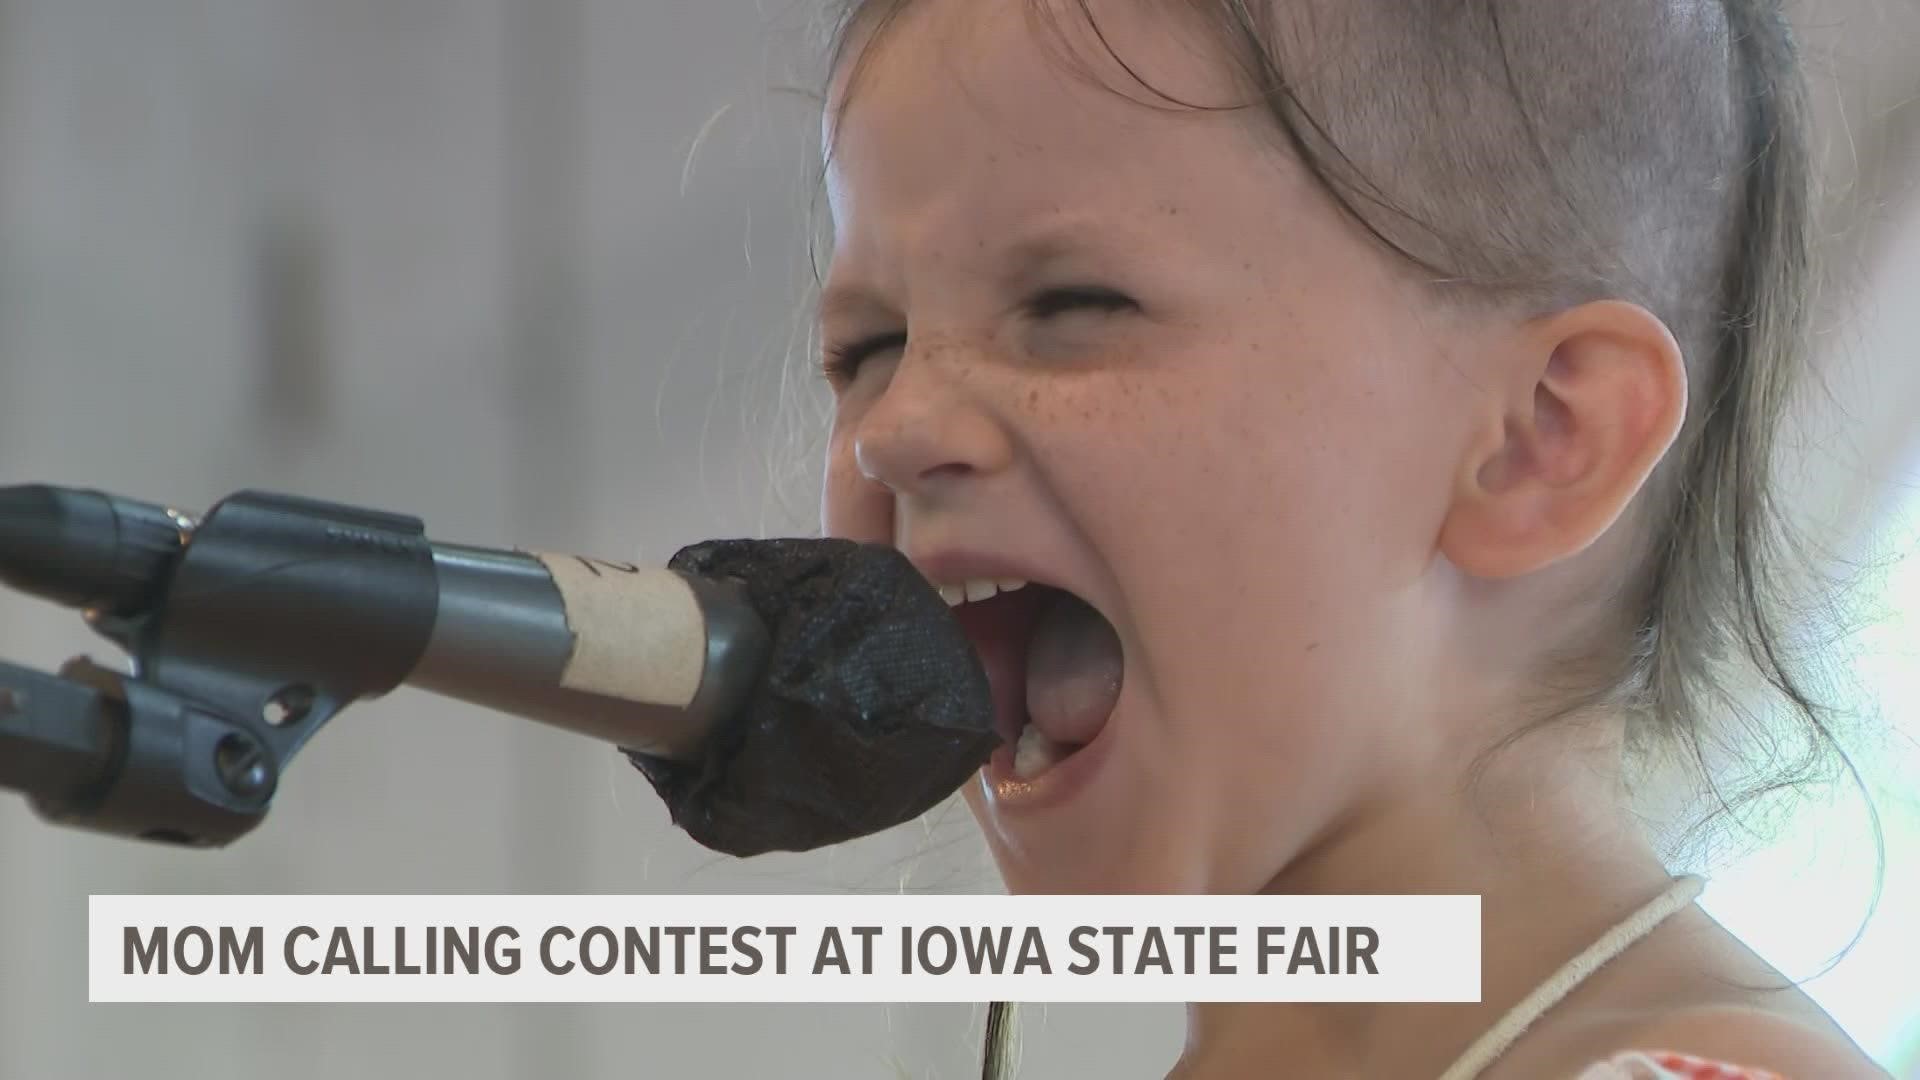 The mom-calling contest took place this morning at pioneer hall, where kids of all ages took the stage to call for their moms. The winner? 9-year-old Zoe Delancey.